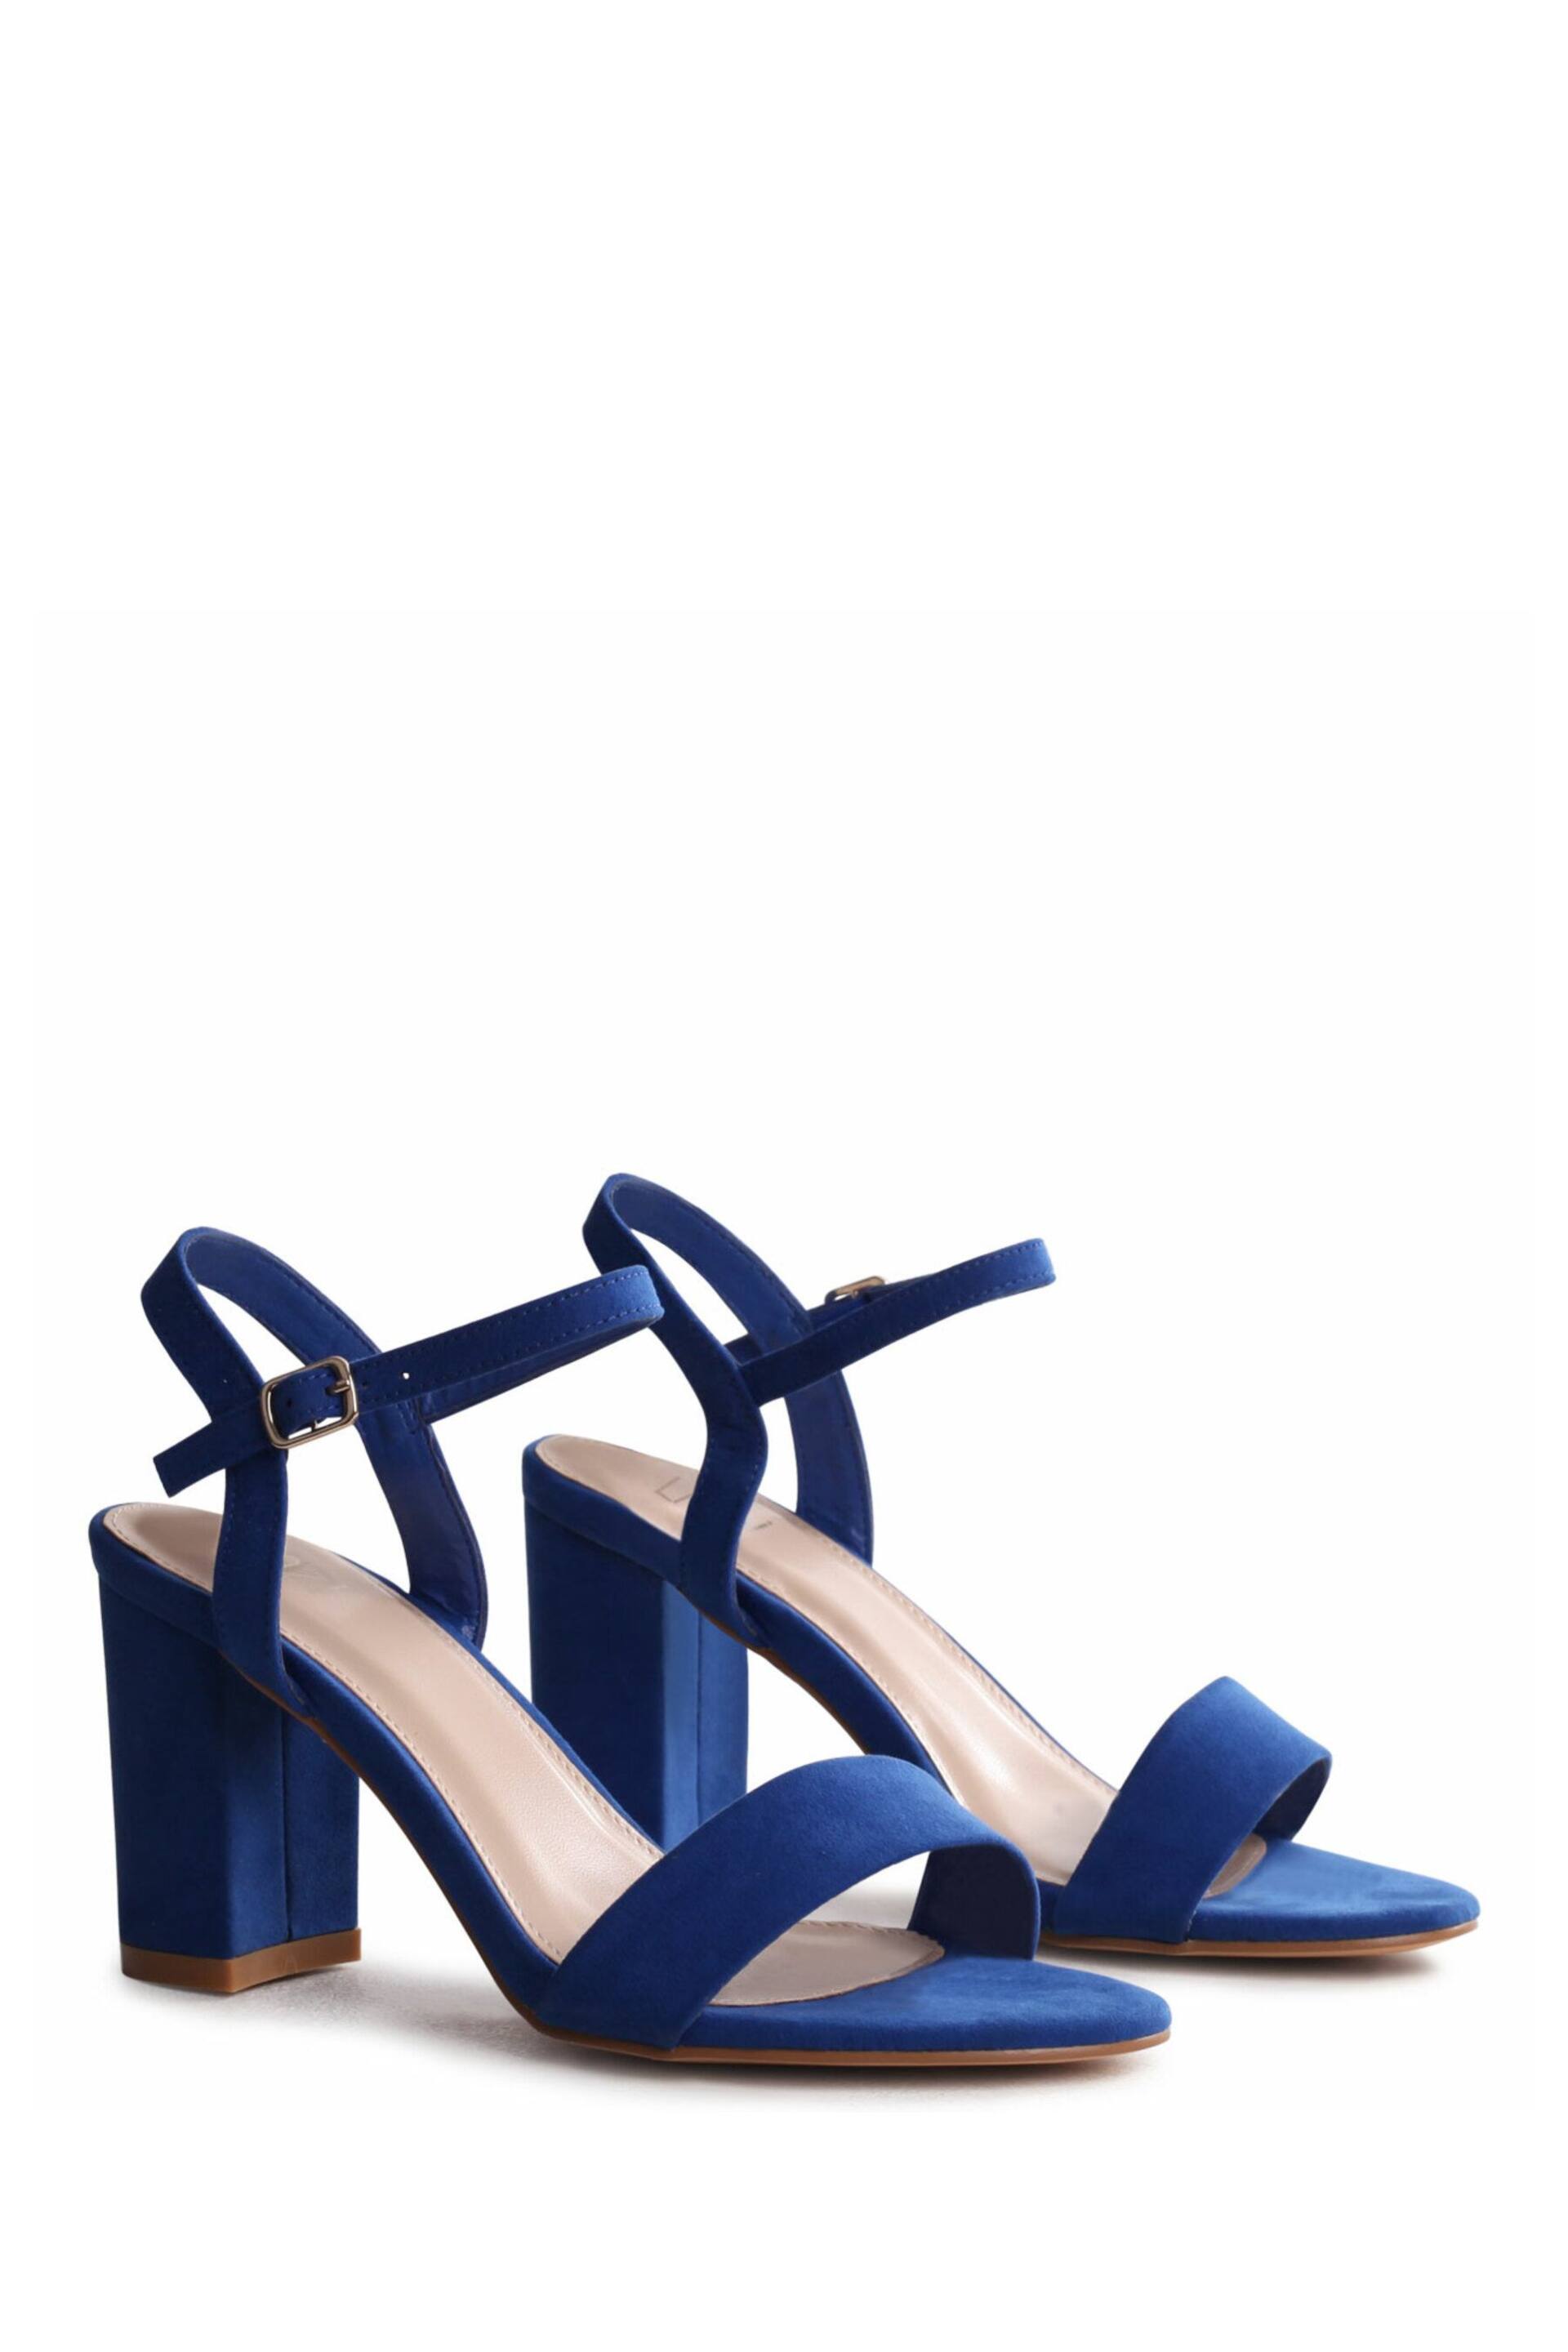 Linzi Blue Skyline Open Back Barely There Block Heeled Sandals - Image 3 of 4